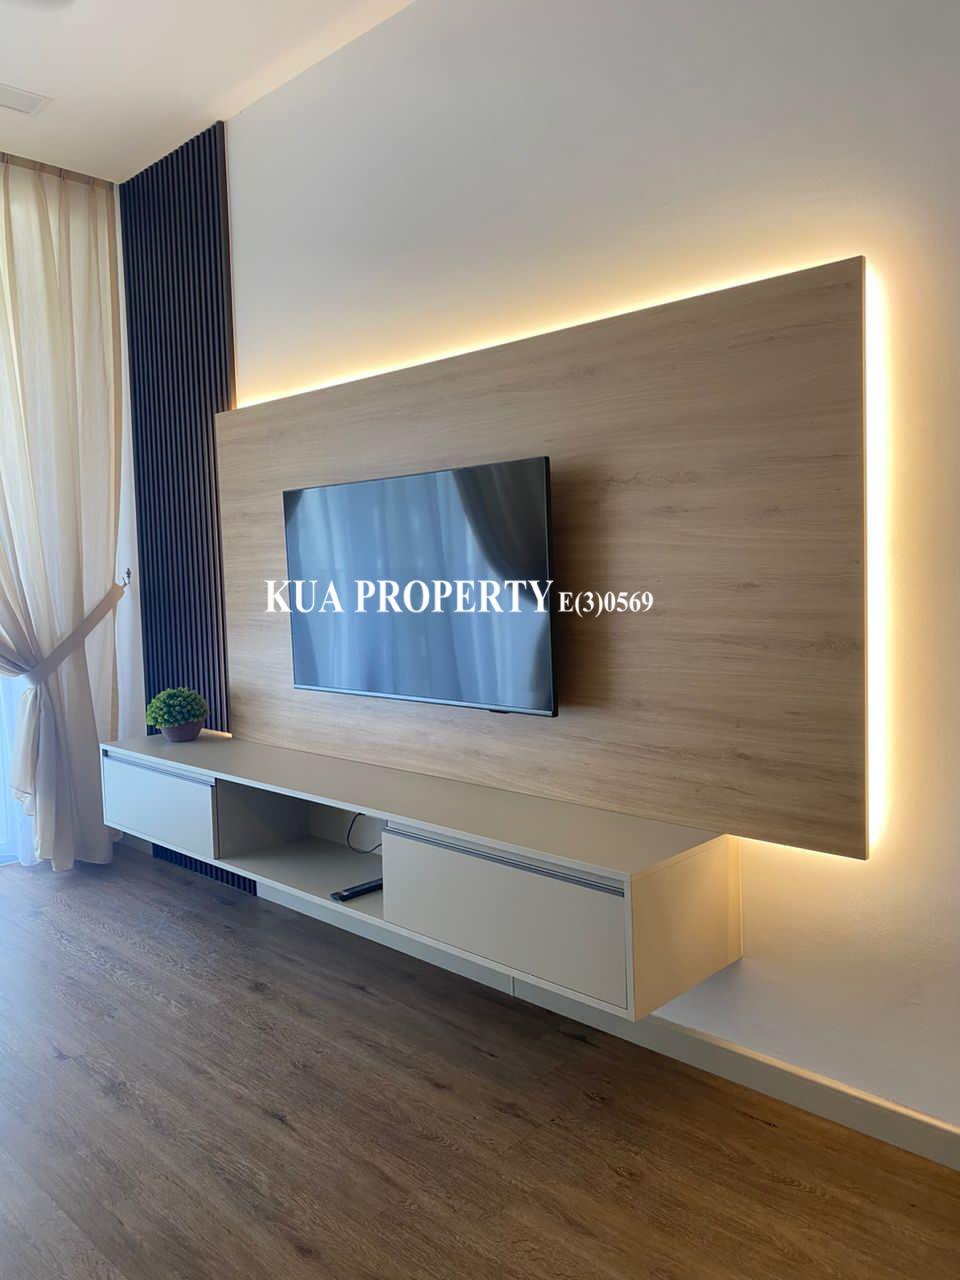 Fully Furnished Avona Residence For Rent at The Northbank Kuching, Tabuan Tranquility.